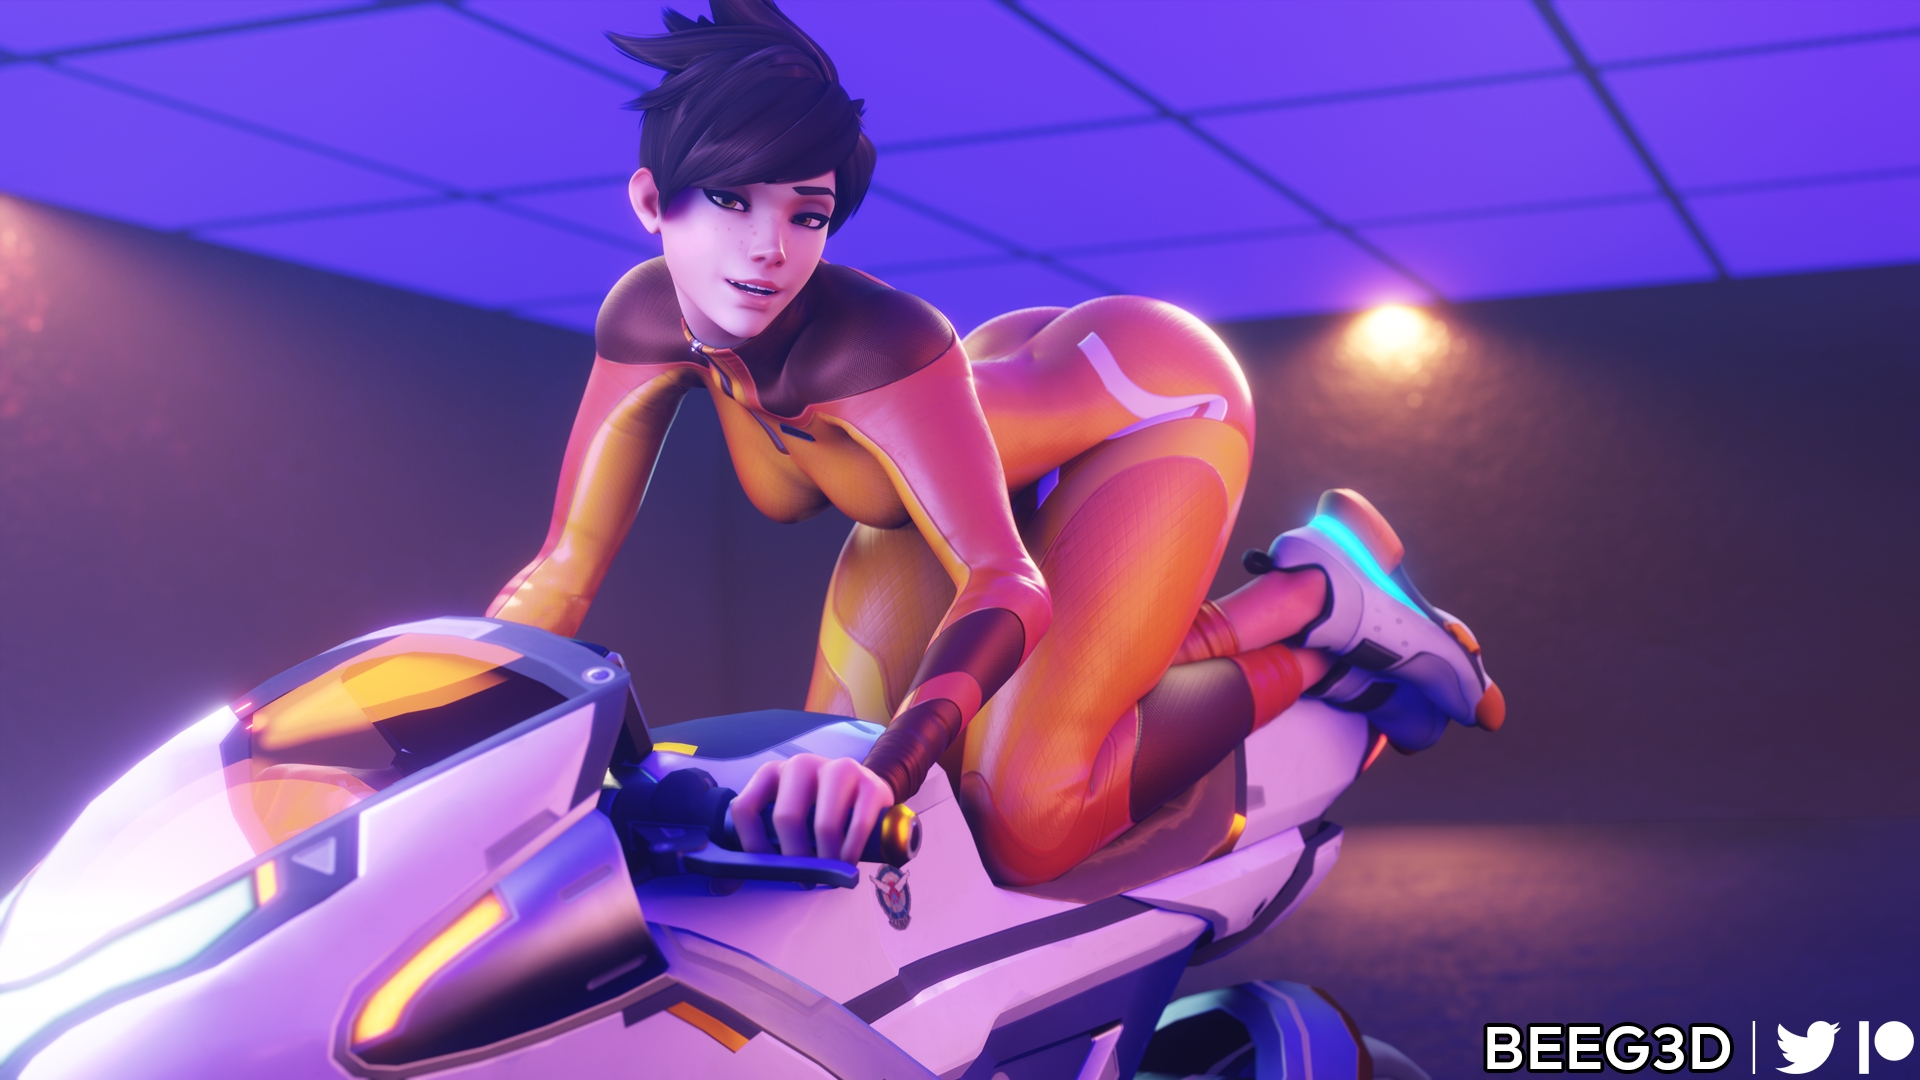 Tracer - Bike Photoshoot Overwatch Tracer Ass Pinup Latex Suit 3